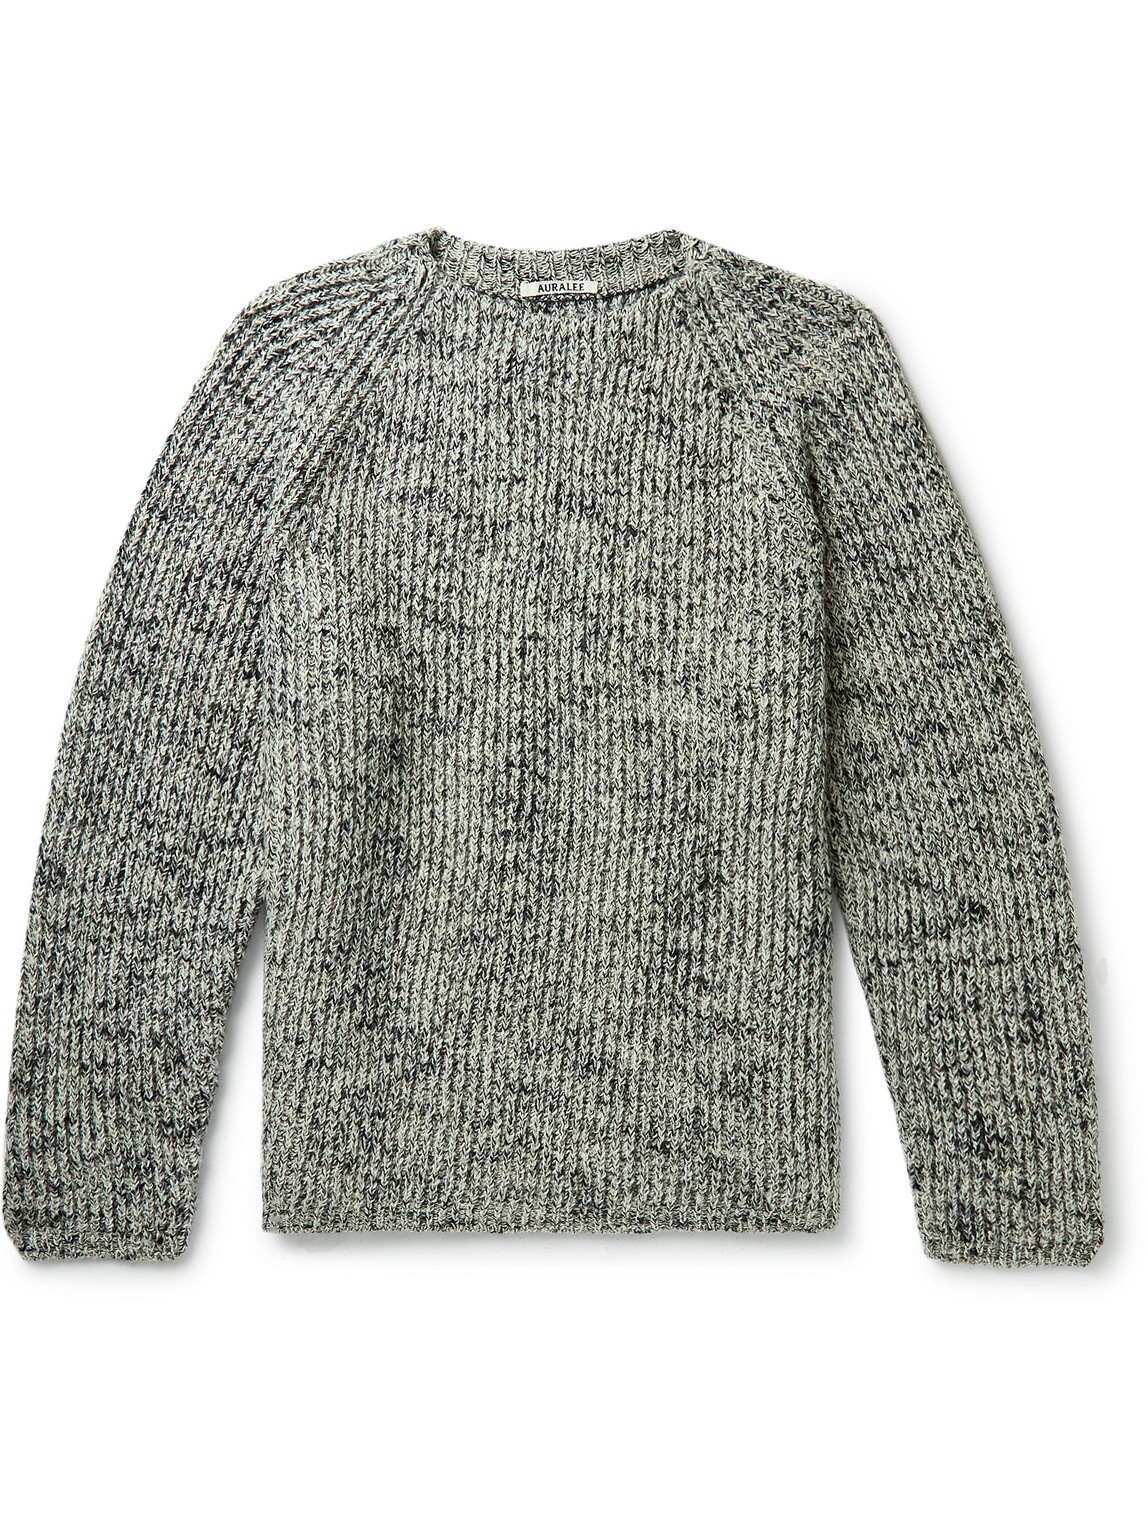 Auralee Ribbed Wool and Alpaca-Blend Sweater